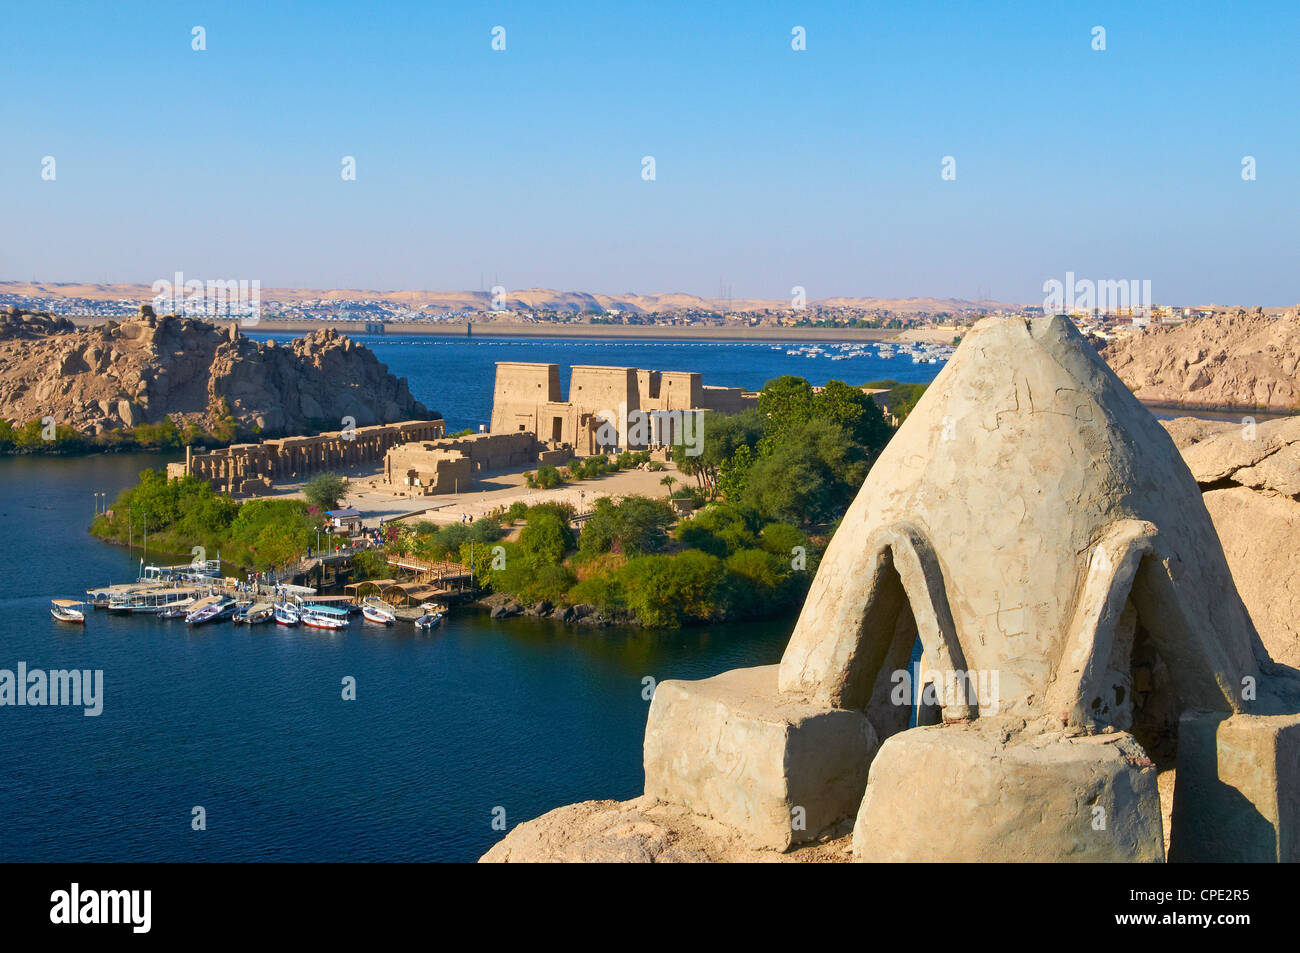 Temple of Philae, UNESCO World Heritage Site, Agilkia Island, Nile Valley, Nubia, Egypt, North Africa, Africa Stock Photo